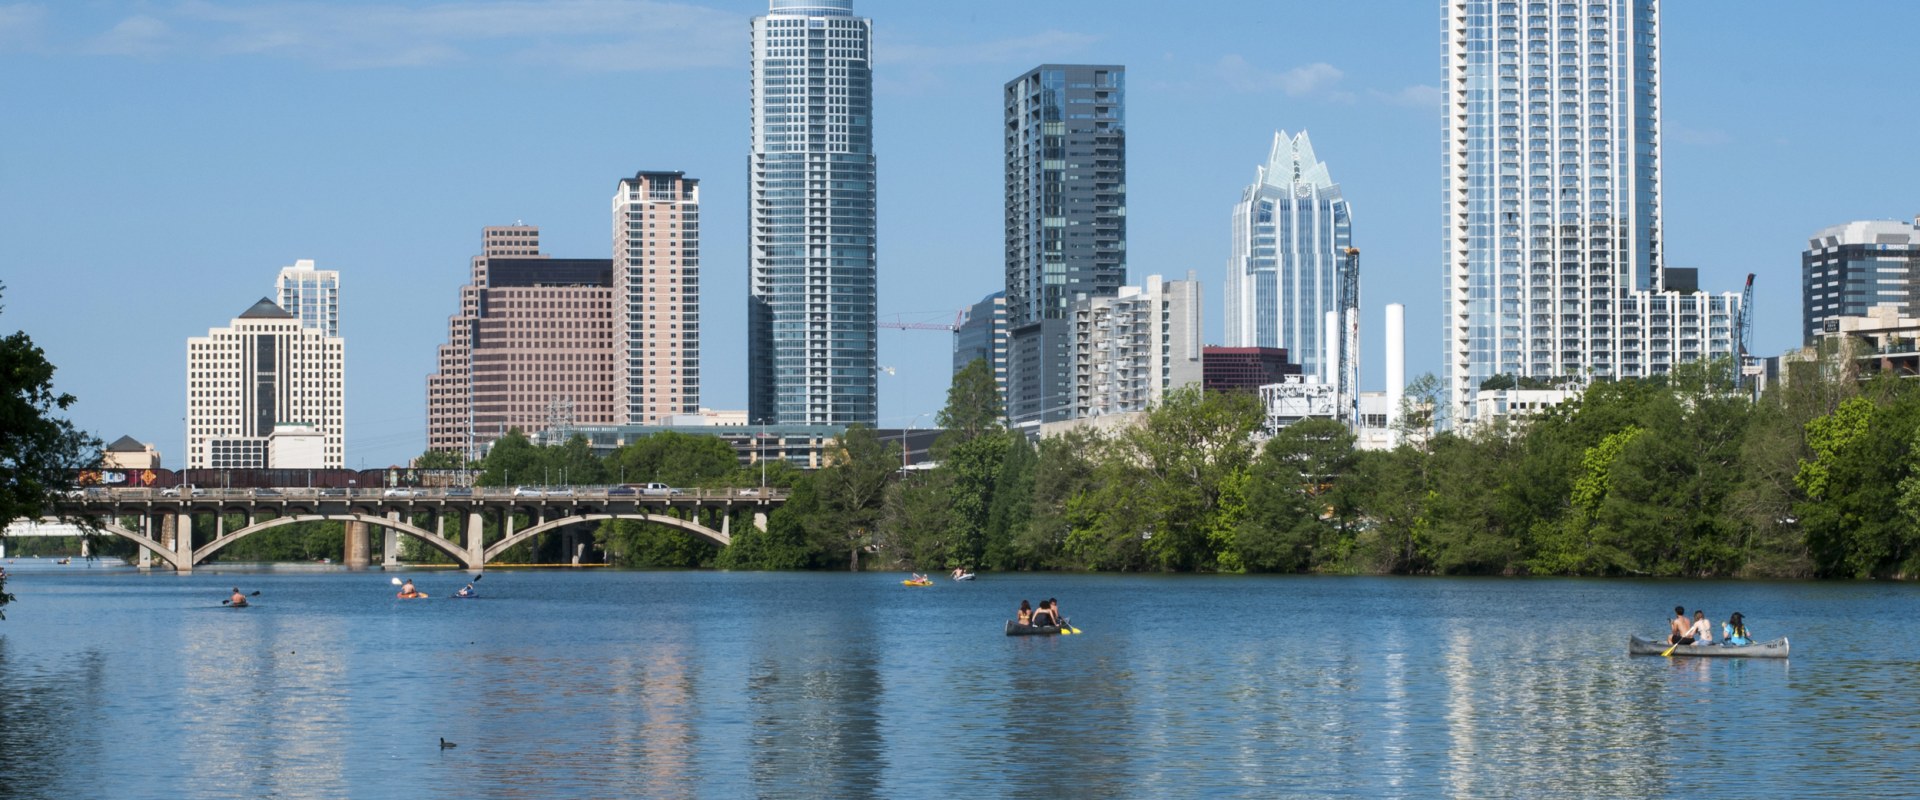 Why is austin important to texas?